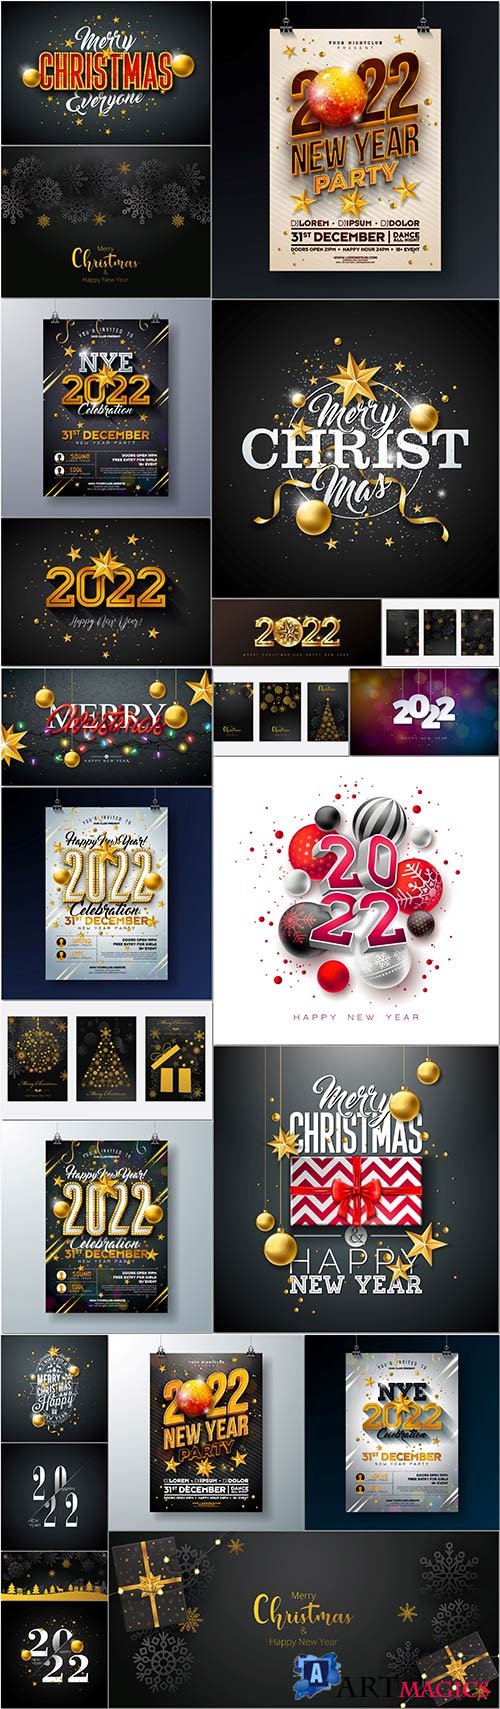 New year party celebration poster template design with d number and shiny disco ball in vector